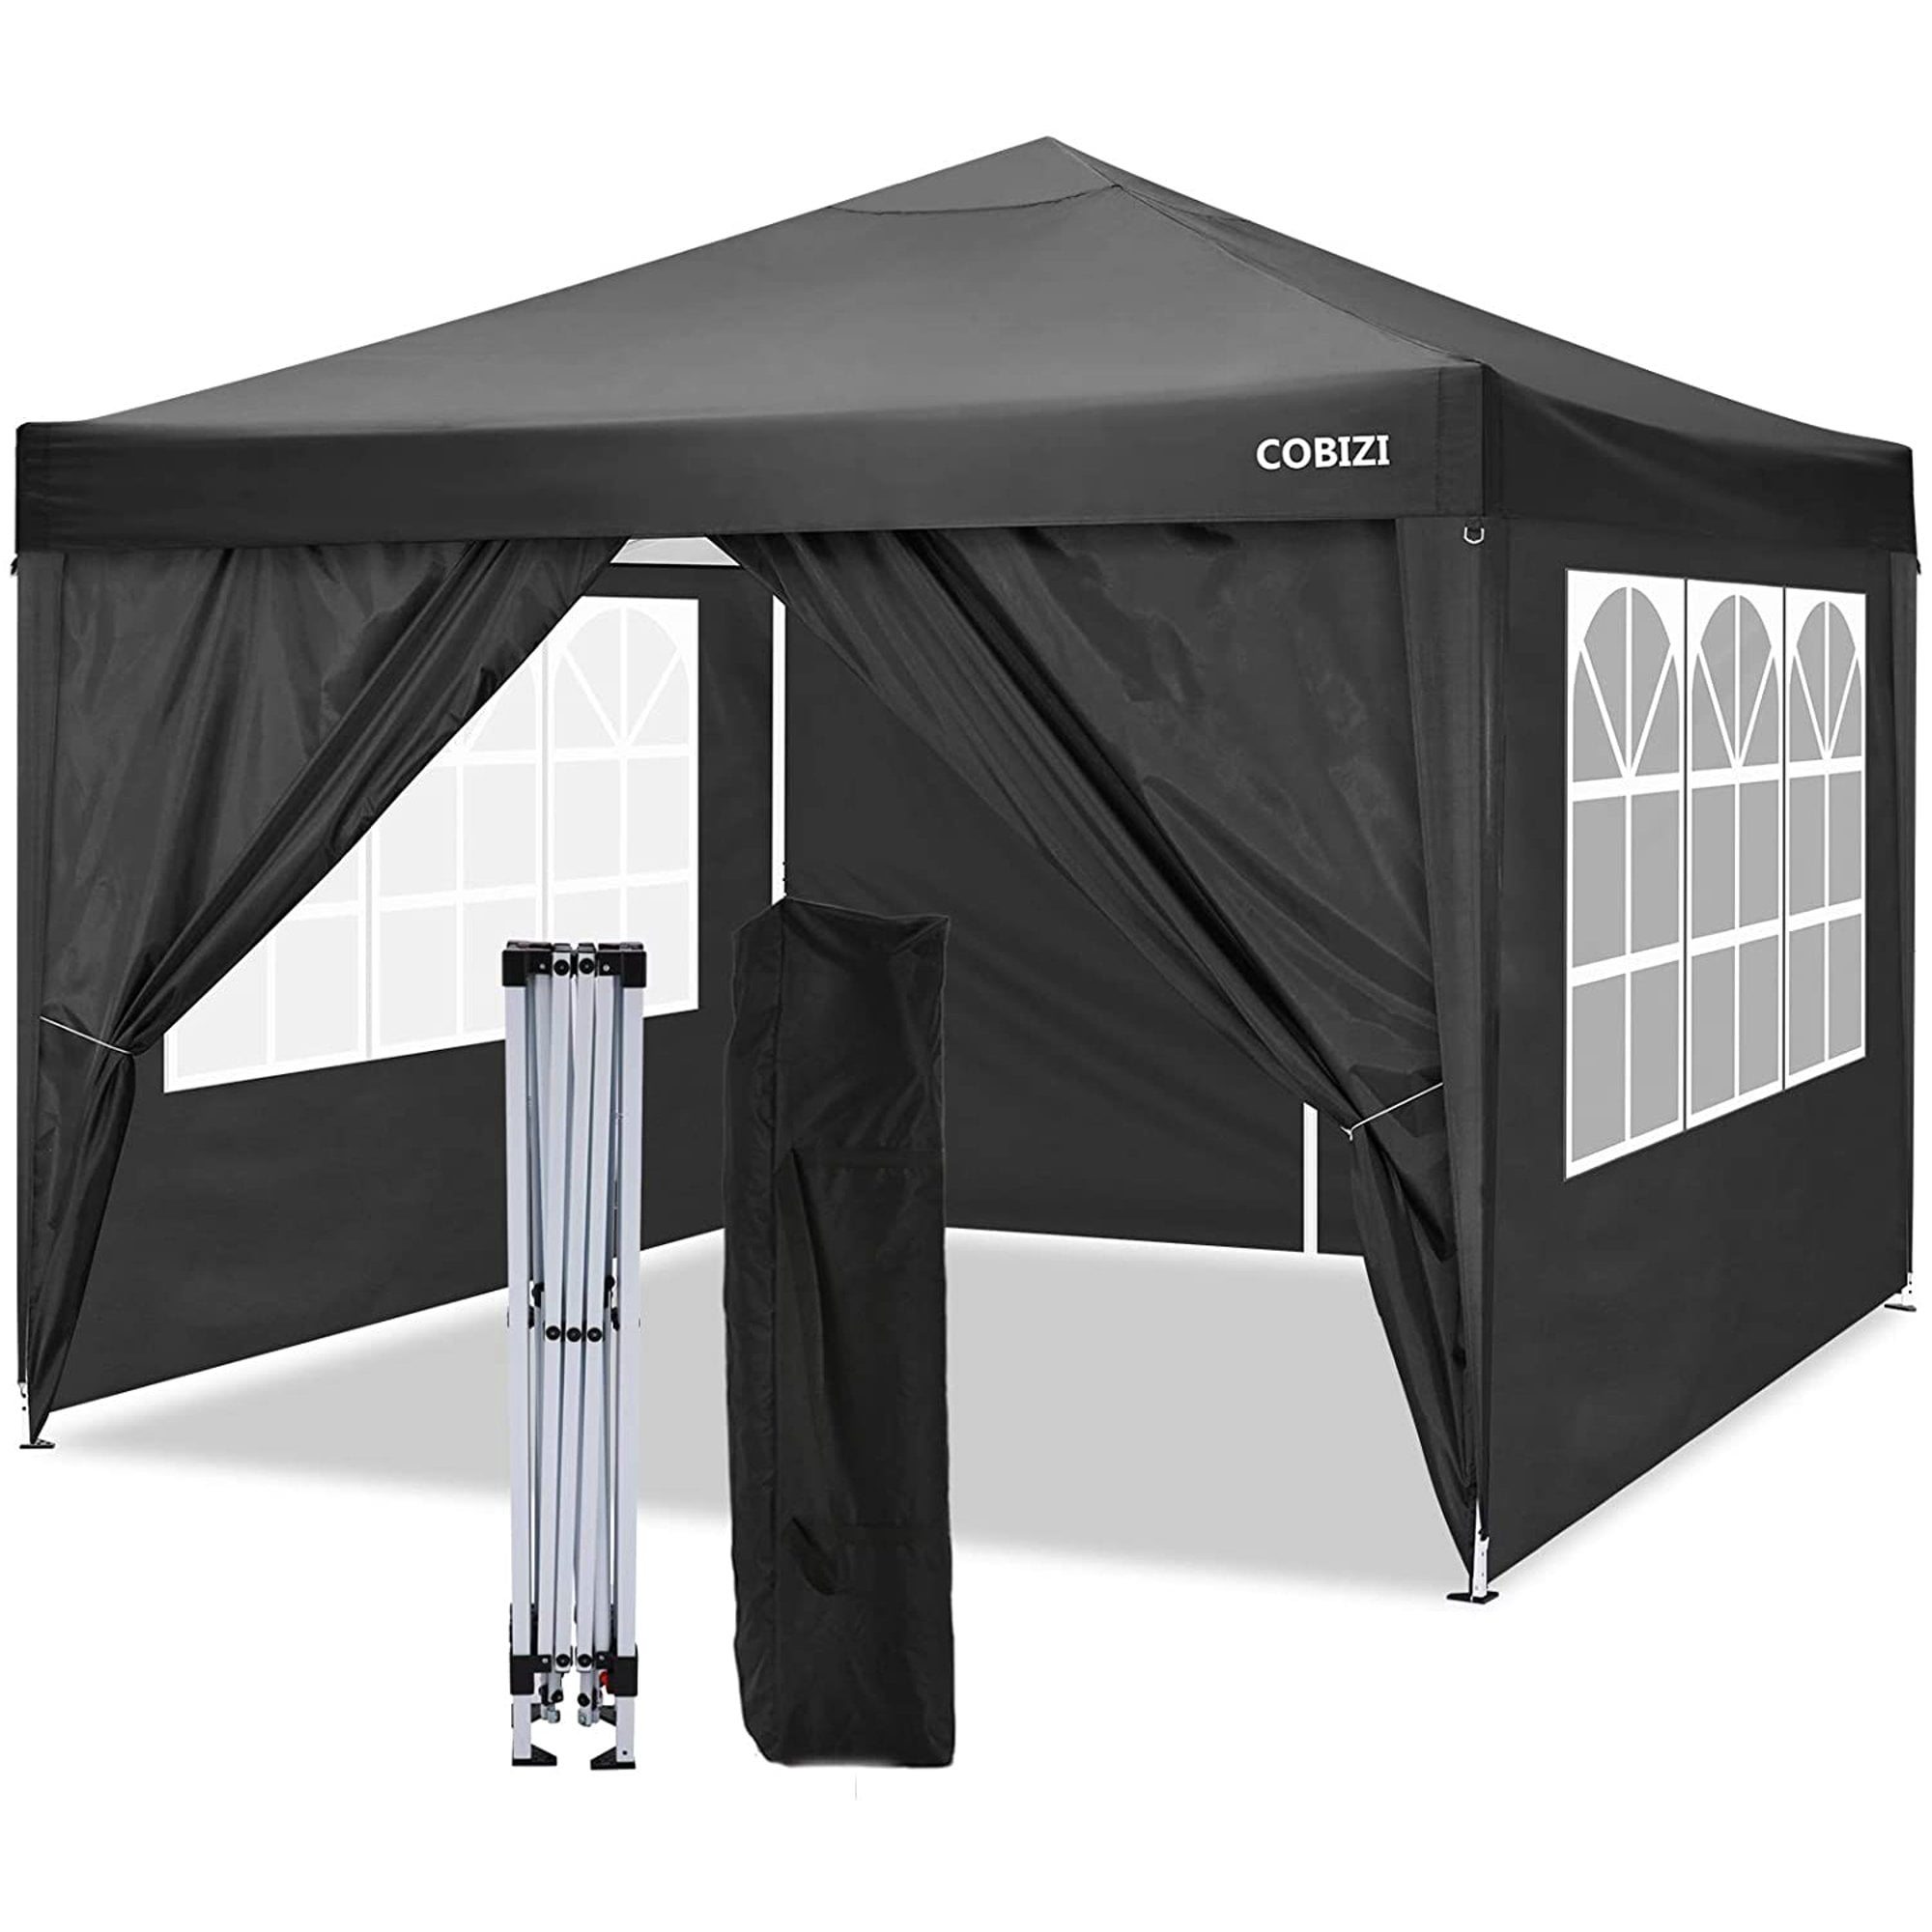 Ez Pop Up Canopy 10x10 Outdoor Commercial Instant Party Market Tent+4 Side Walls 